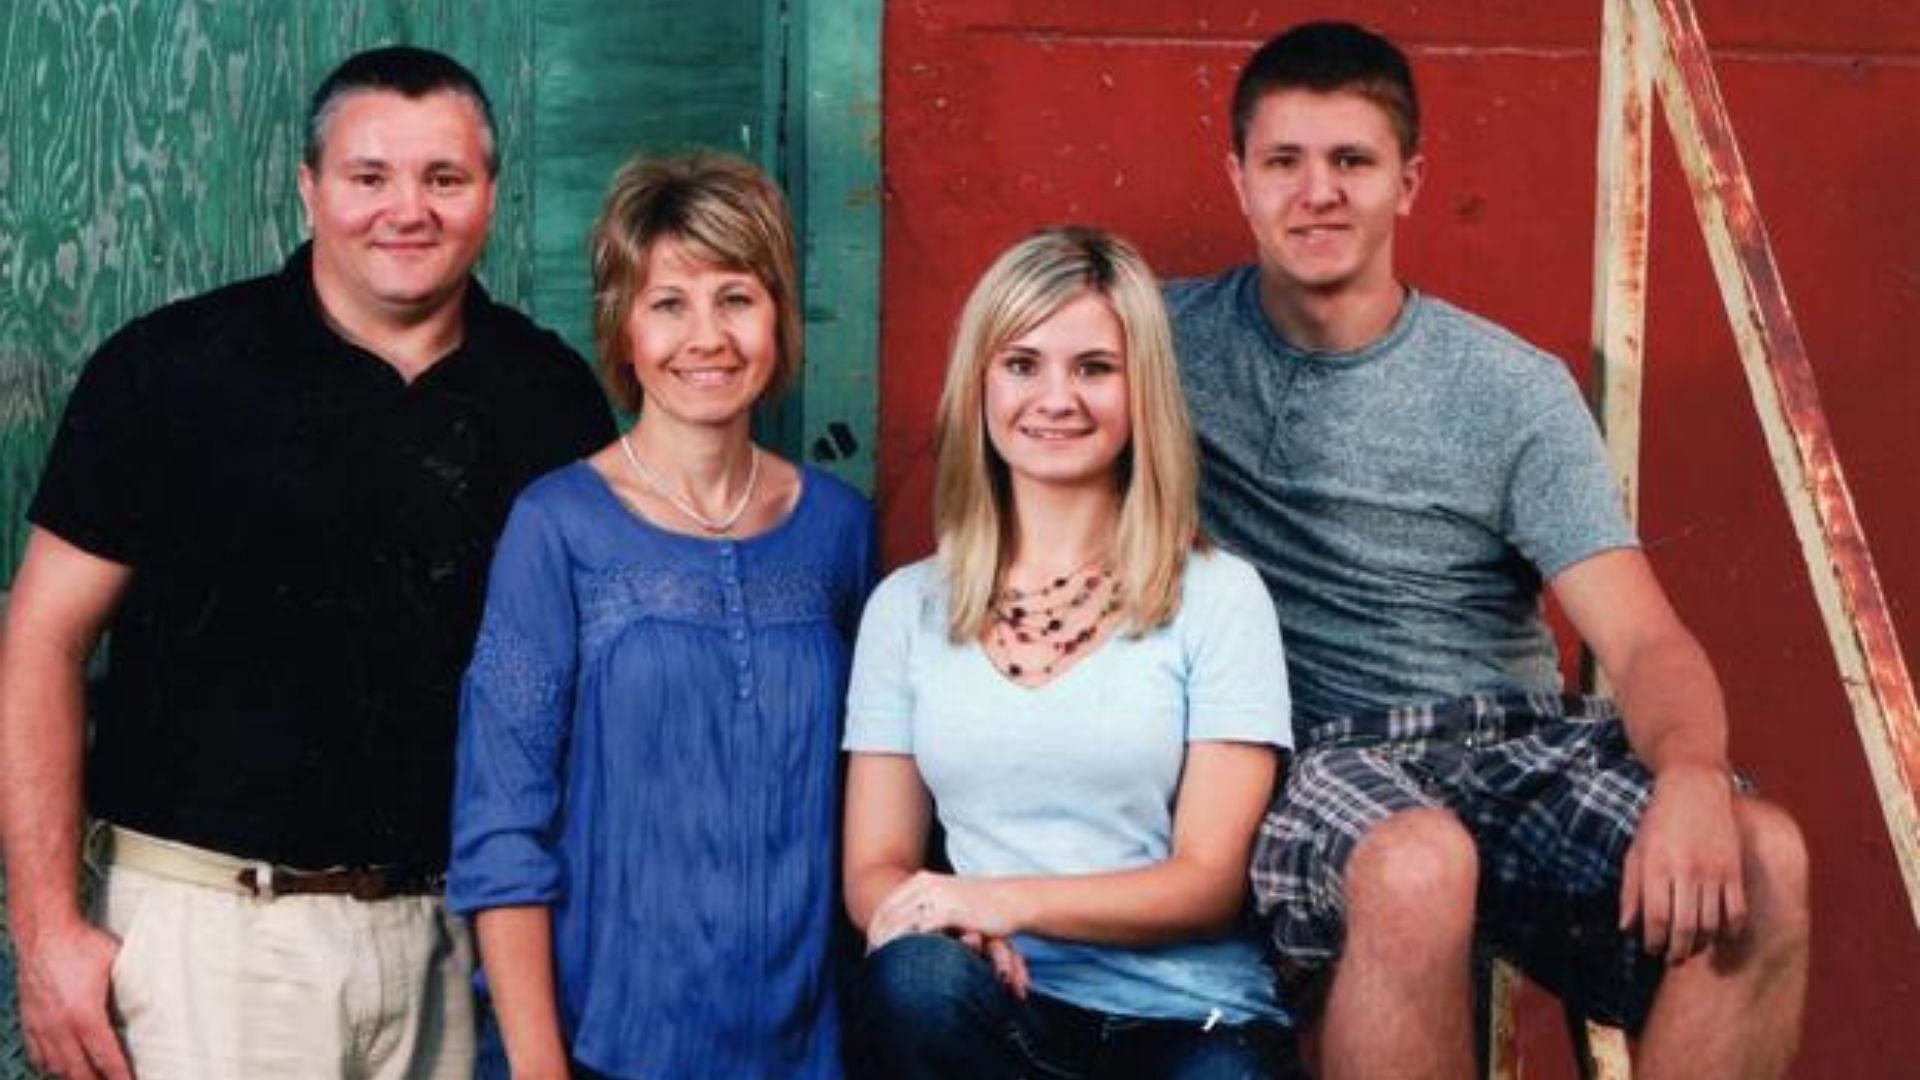 A still of Barbara Kendhammer with husband Todd Kendhammer and their two children (Image Via CBS News)